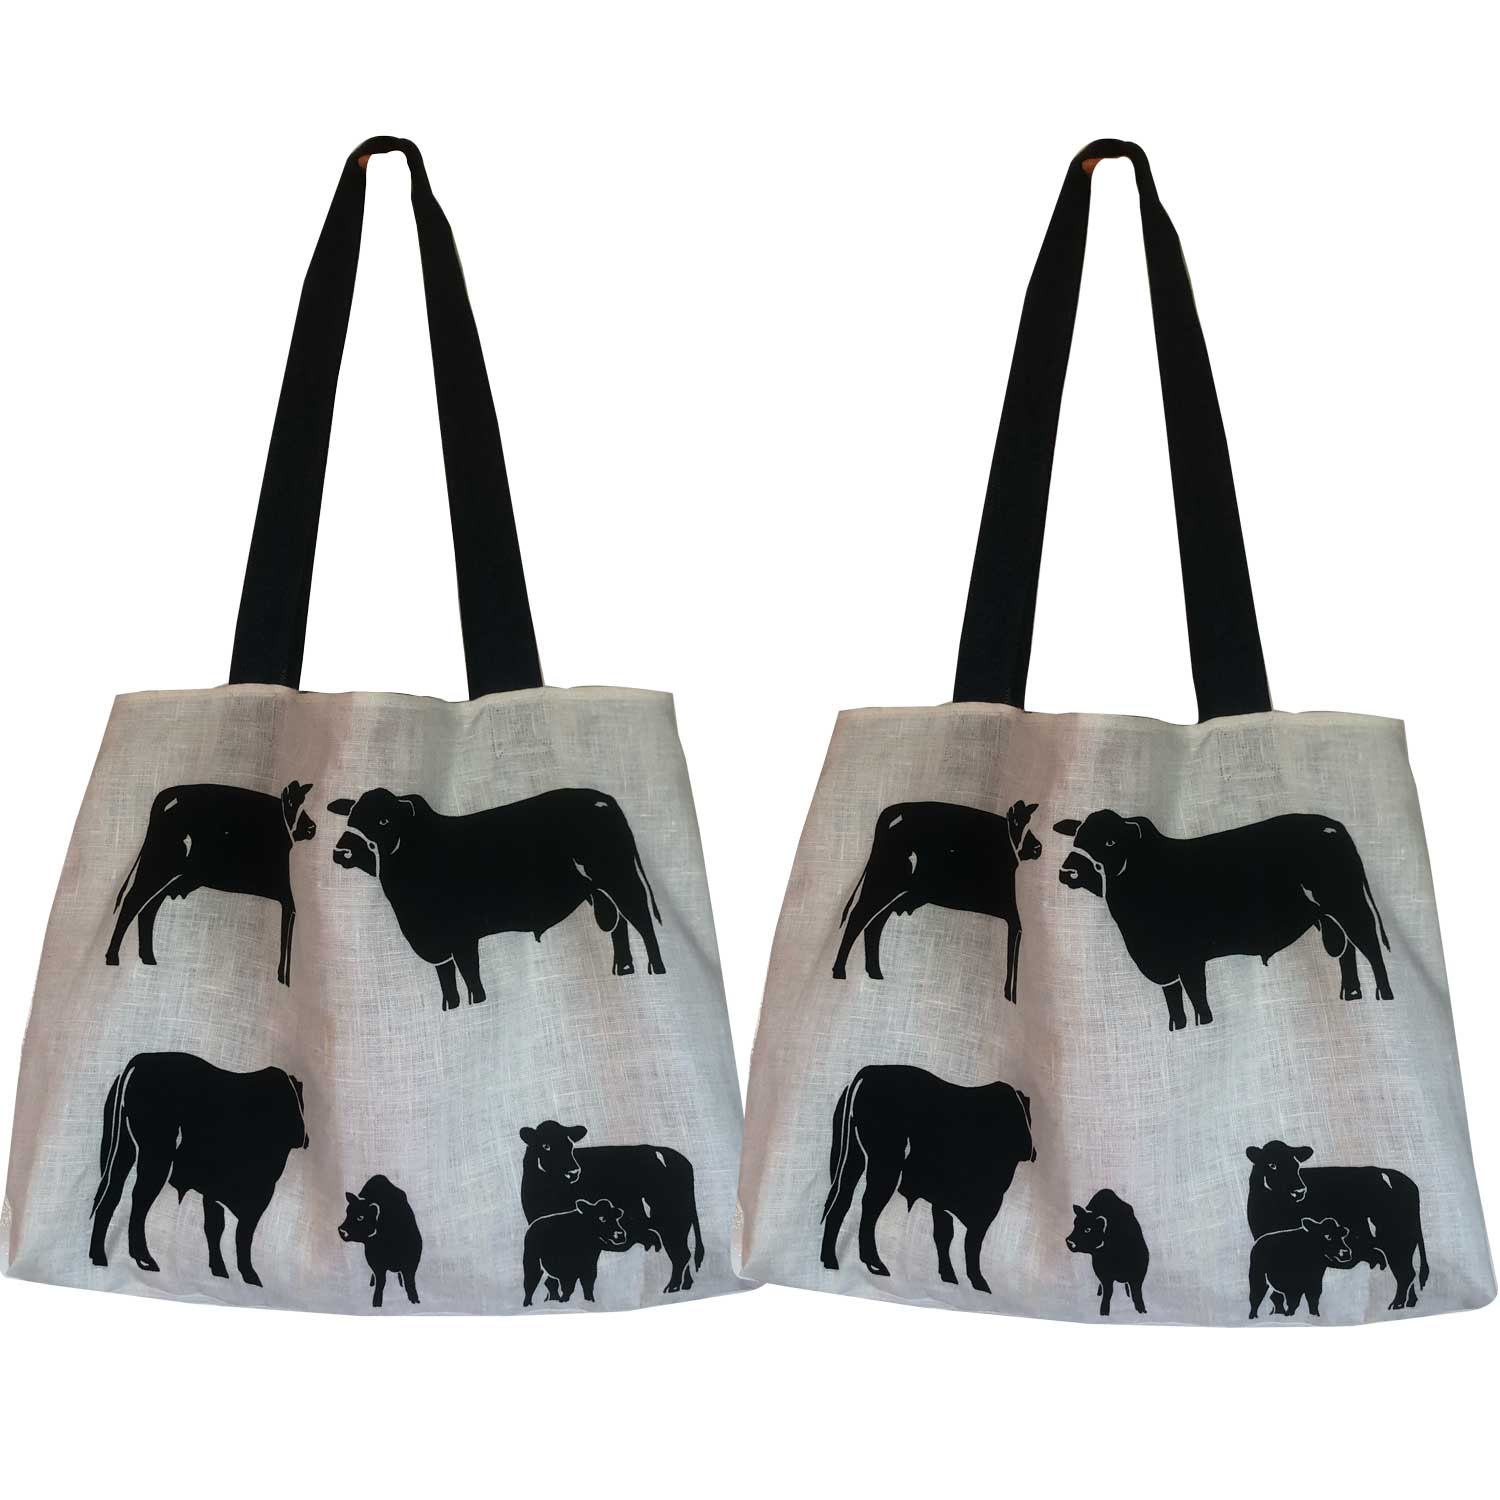 Cows in formation on a teatowel tote